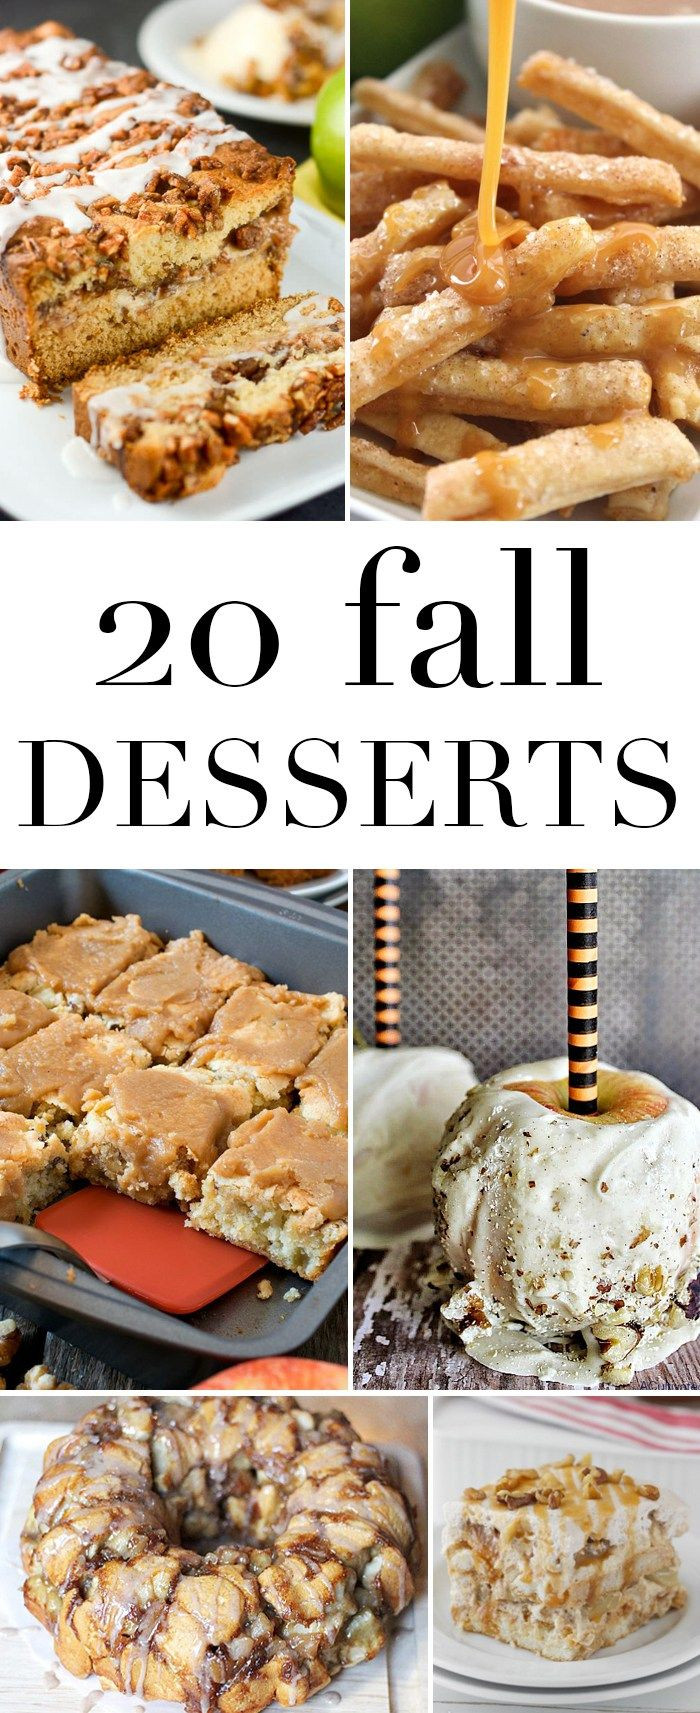 Recipes For Fall Desserts
 92 best images about Seasonal Fall on Pinterest